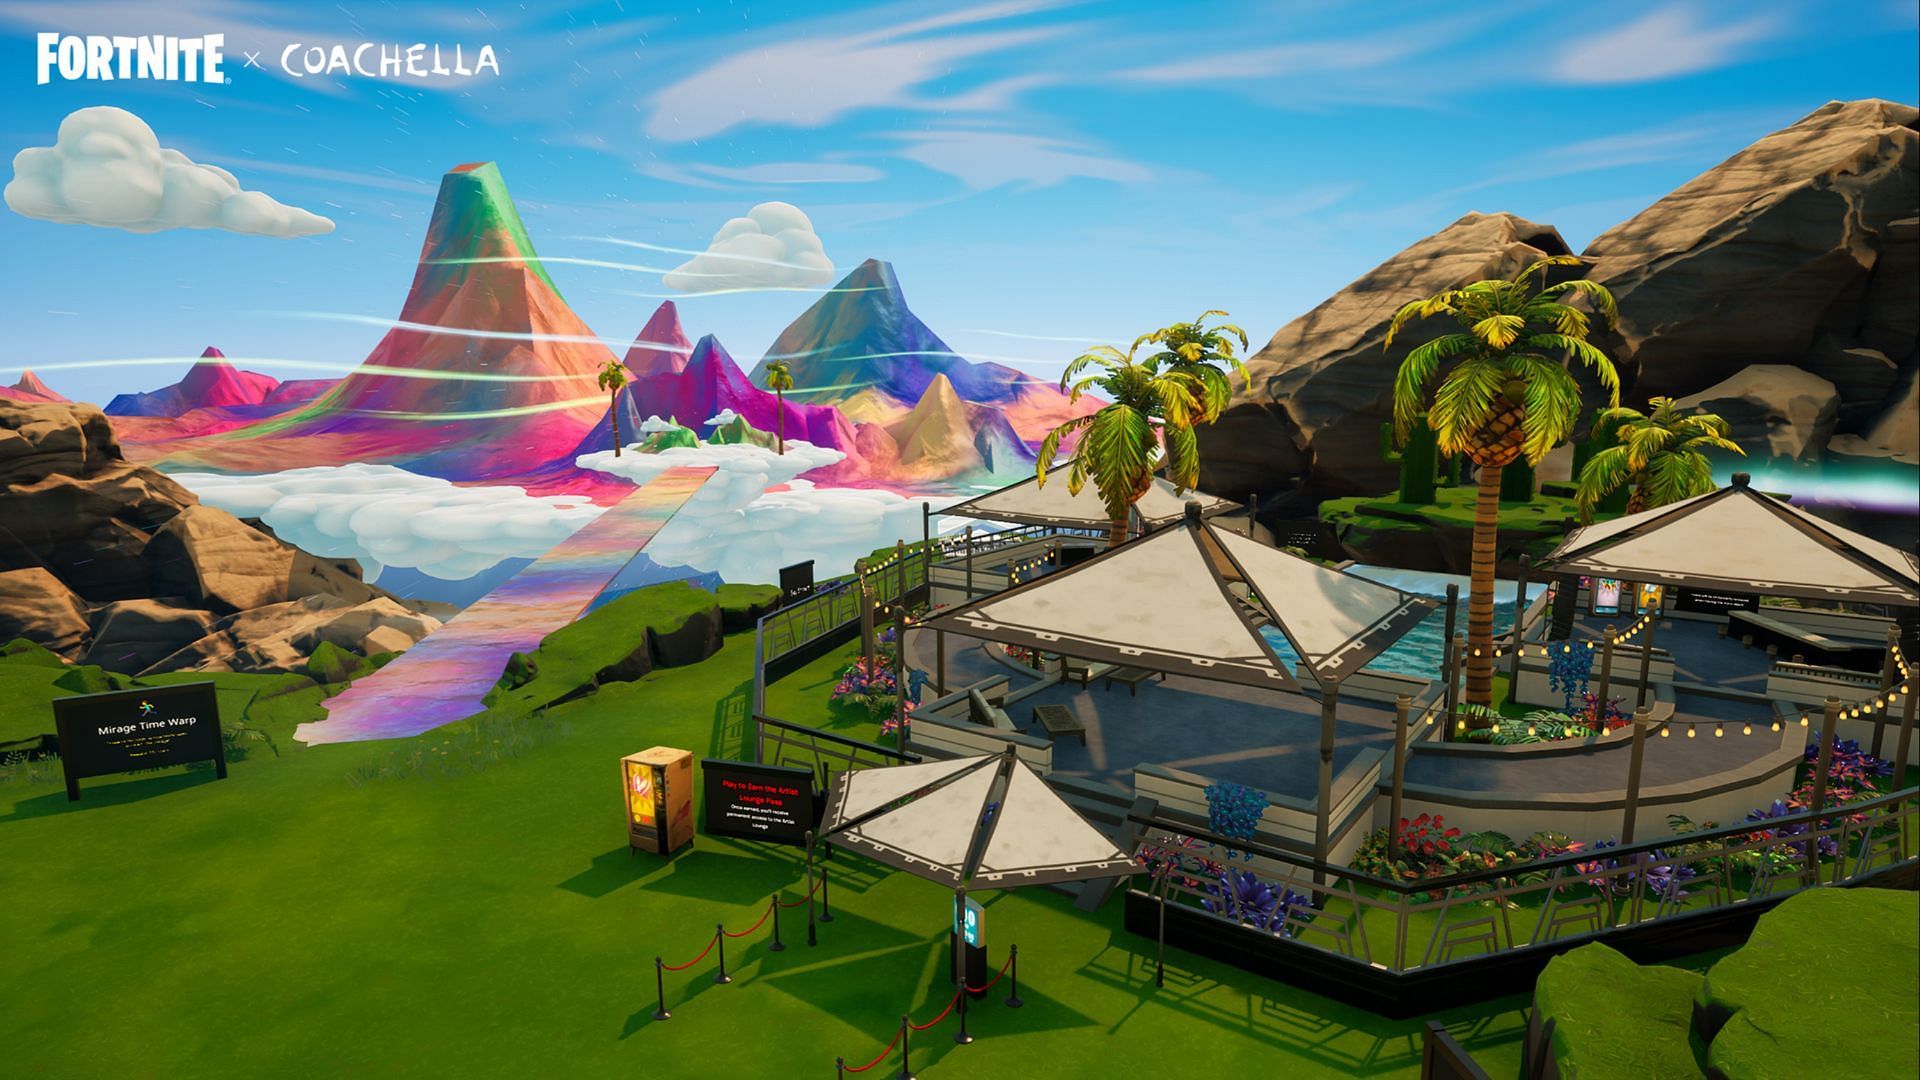 Coachella x Fortnite is one of the biggest collaborations of the year.